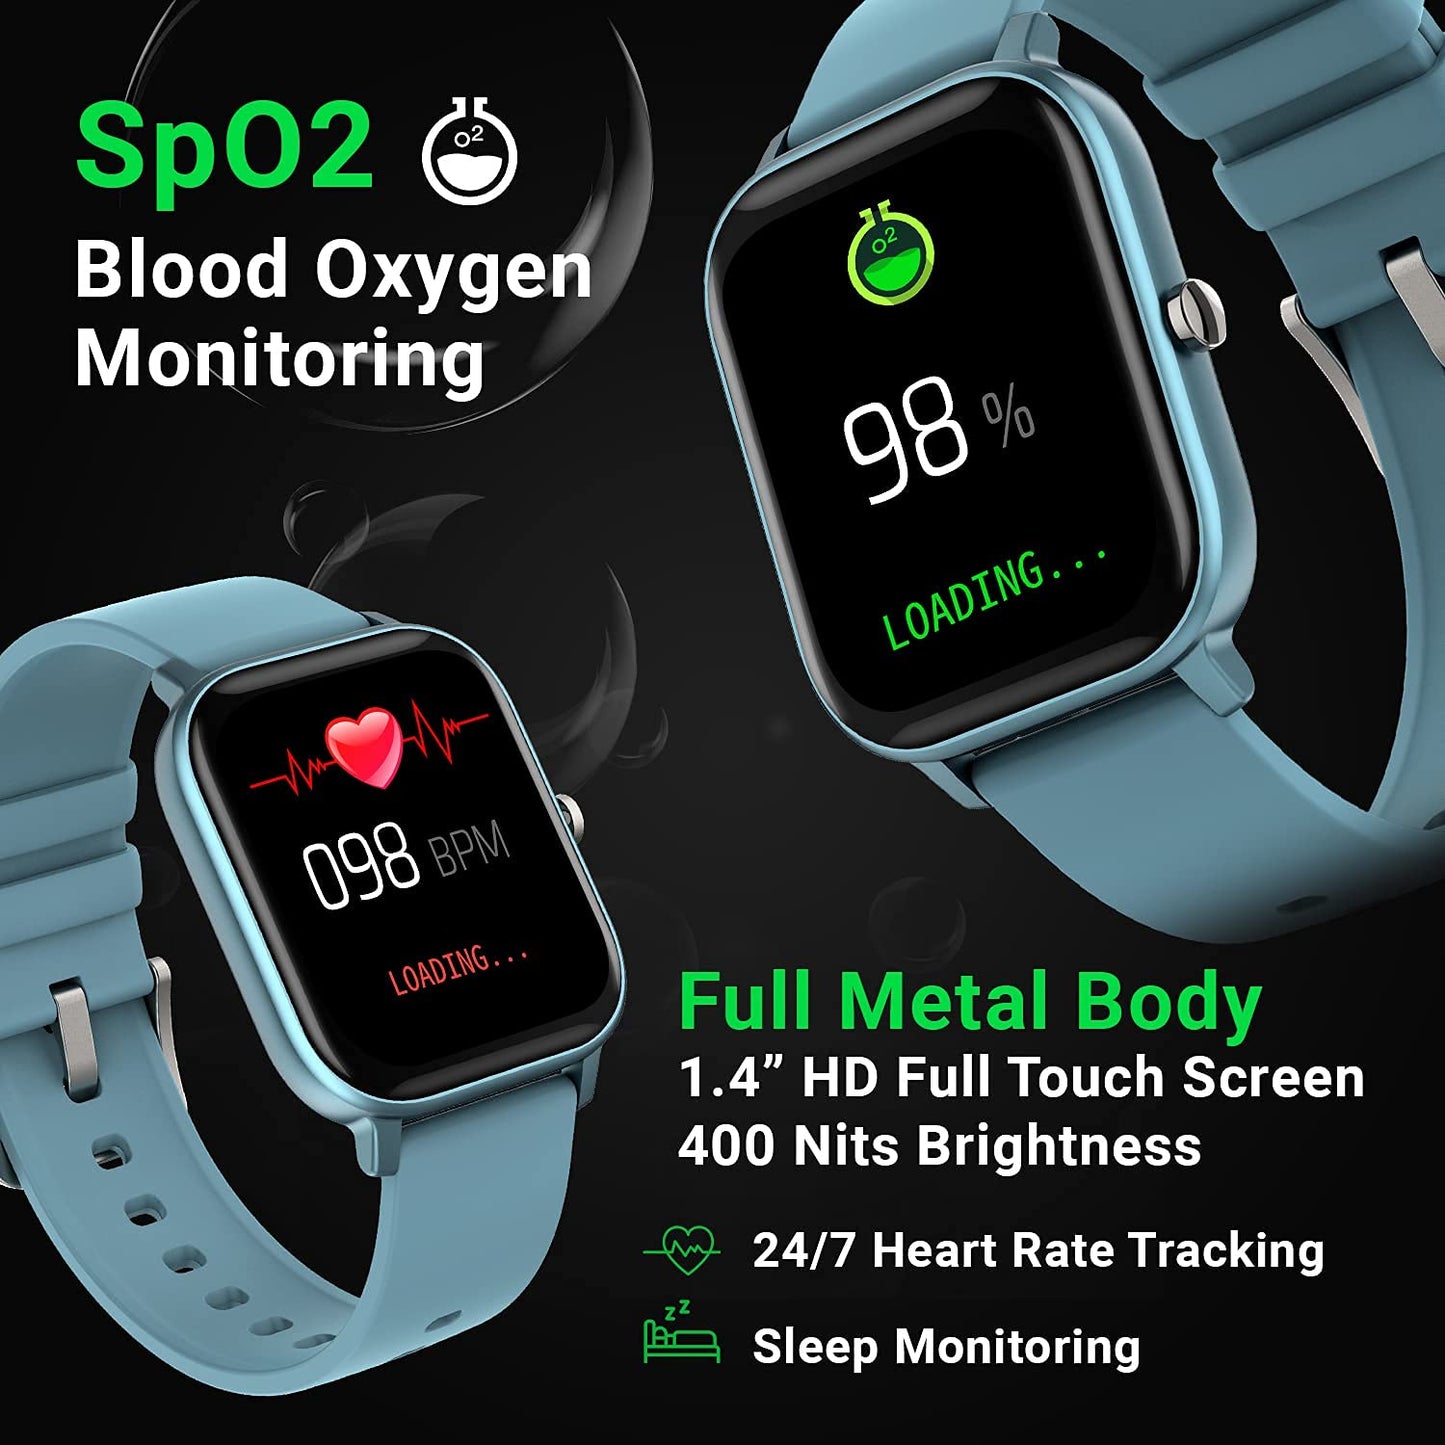 Fire-Boltt (Renewed) SpO2 Full Touch 1.4 inch Smart Watch 400 Nits Peak Brightness Metal Body with 24 * 7 Heart Rate Monitoring IPX7 with Blood Oxygen, Fitness, Sports & Sleep Tracking (Blue)